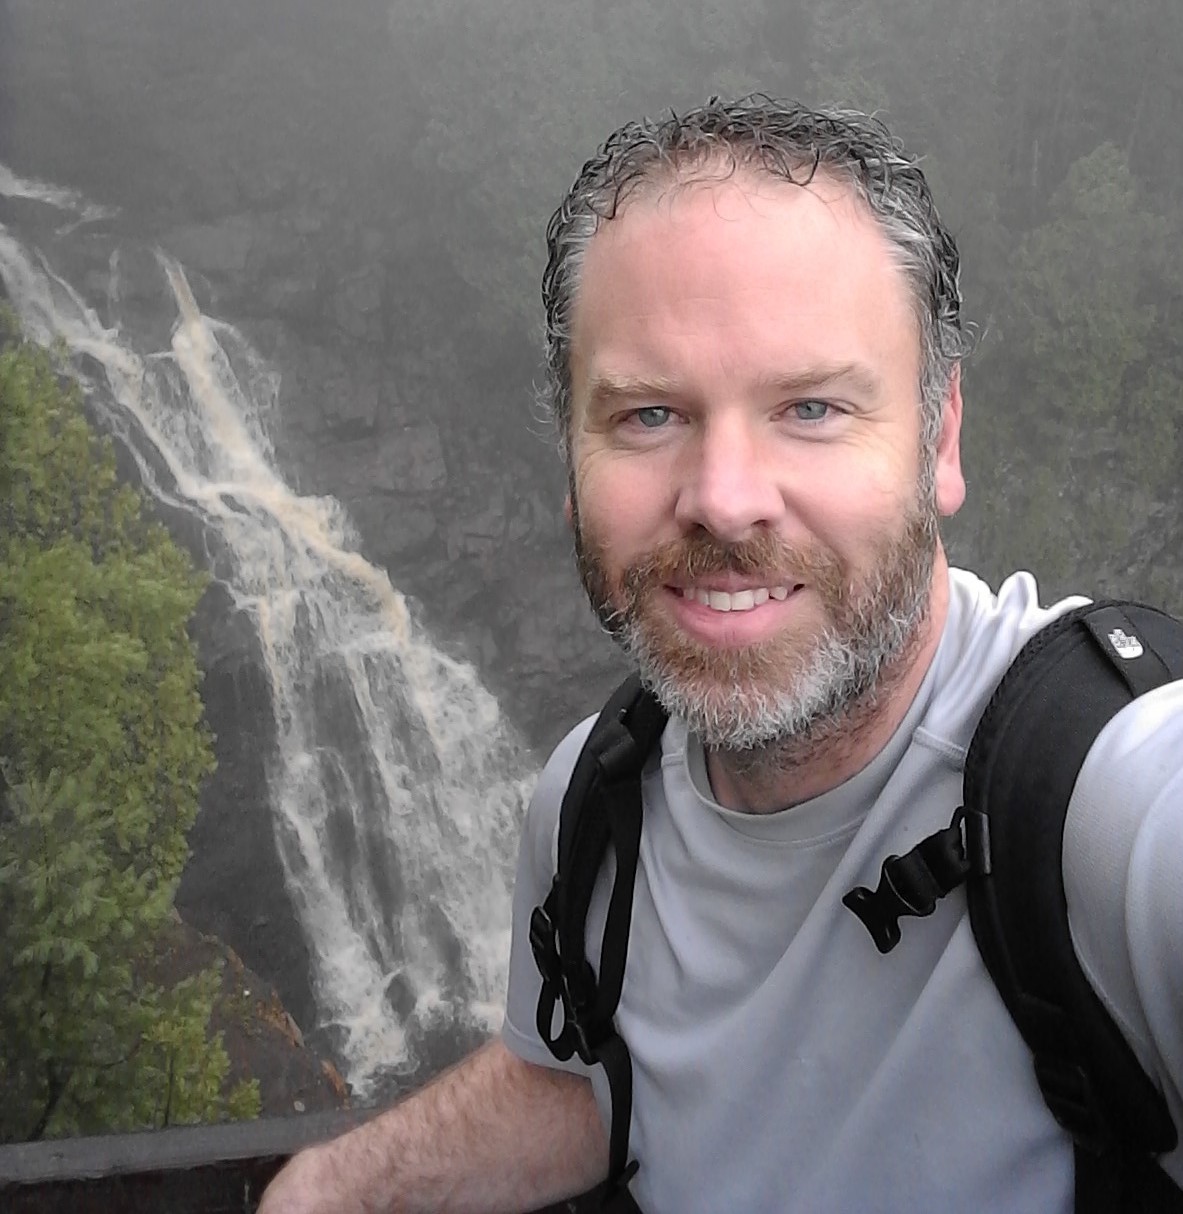 Shawn Crimmins standing in front of a waterfall.